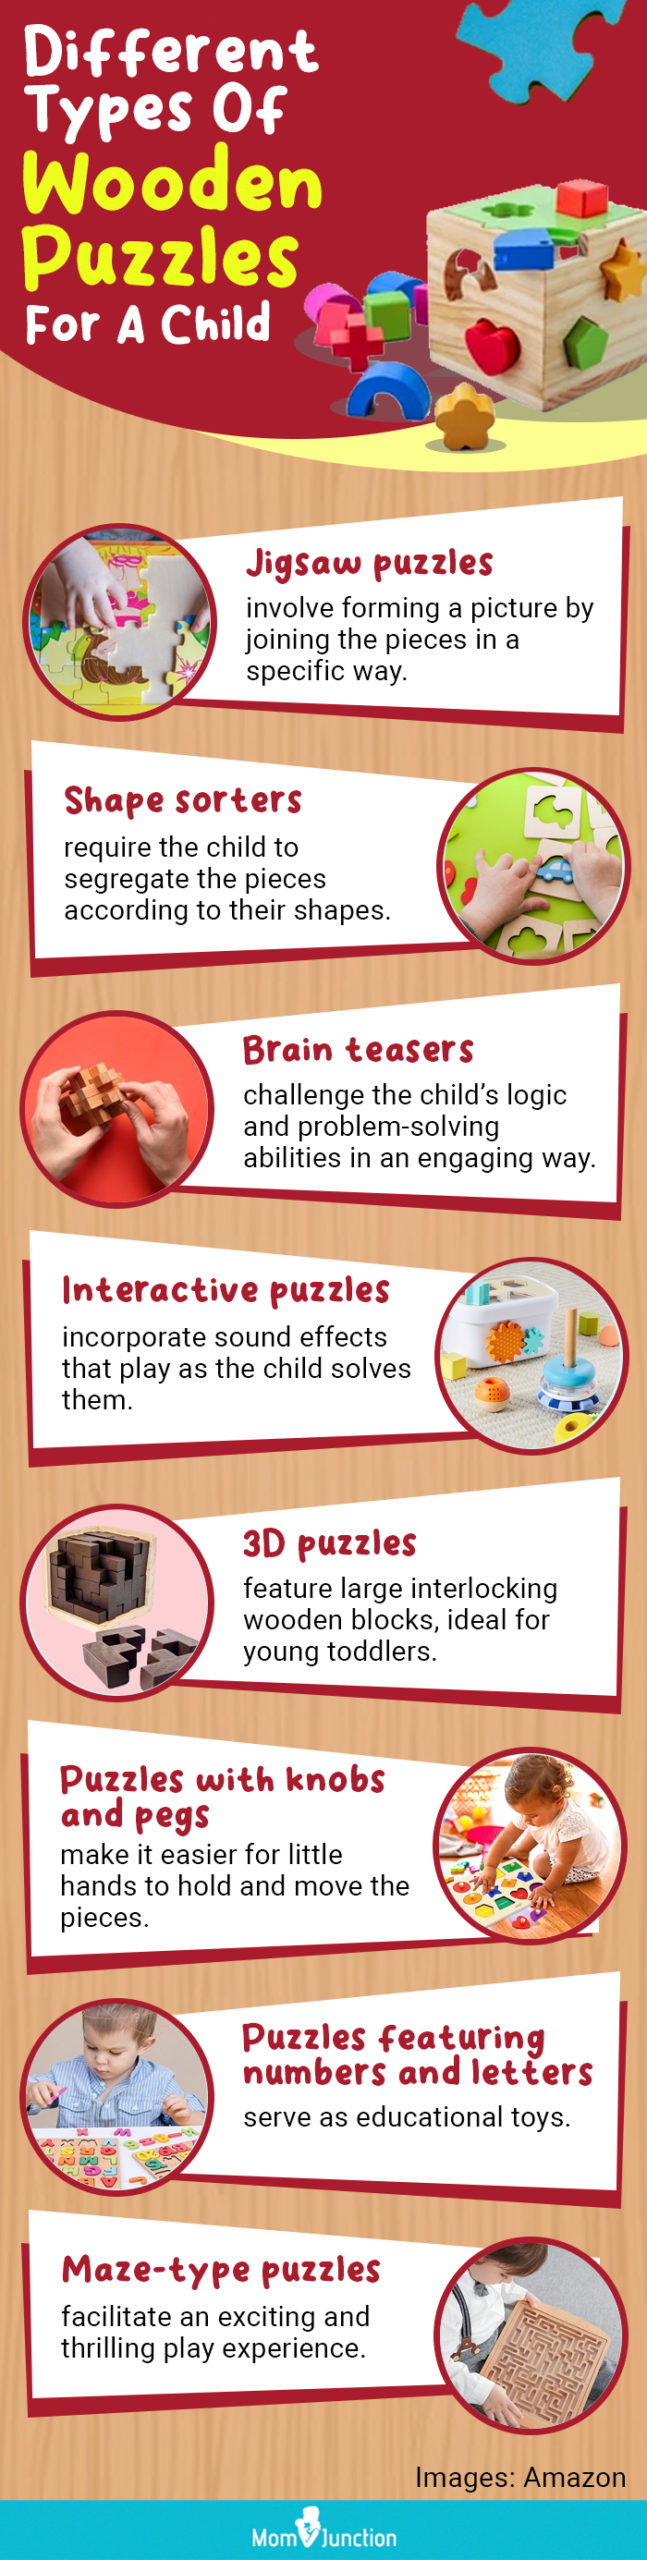 3D Puzzle Board Educational Game Classic Logical Mind Children